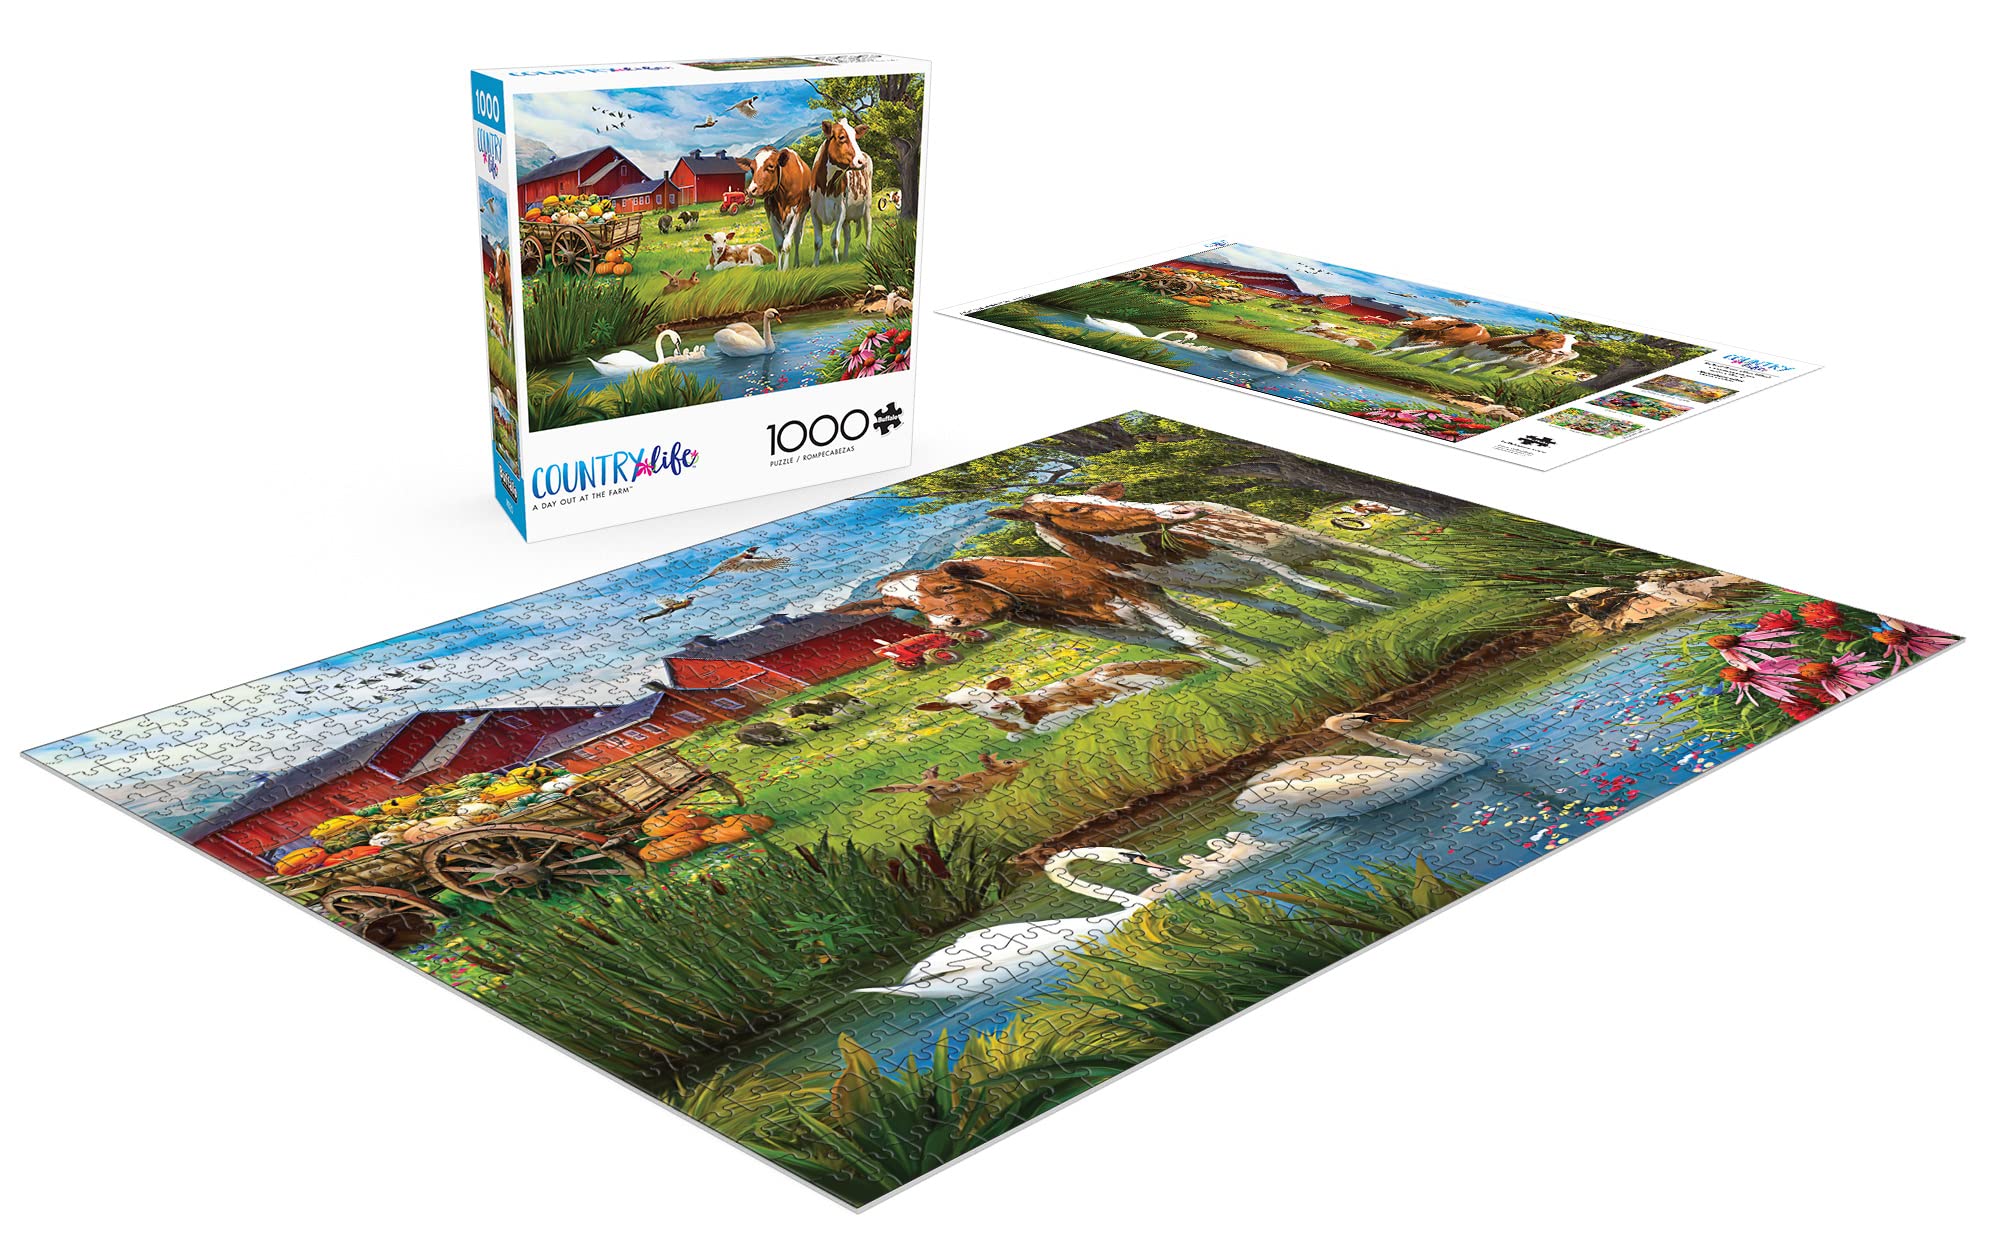 Buffalo Games - A Day Out at The Farm - 1000 Piece Jigsaw Puzzle